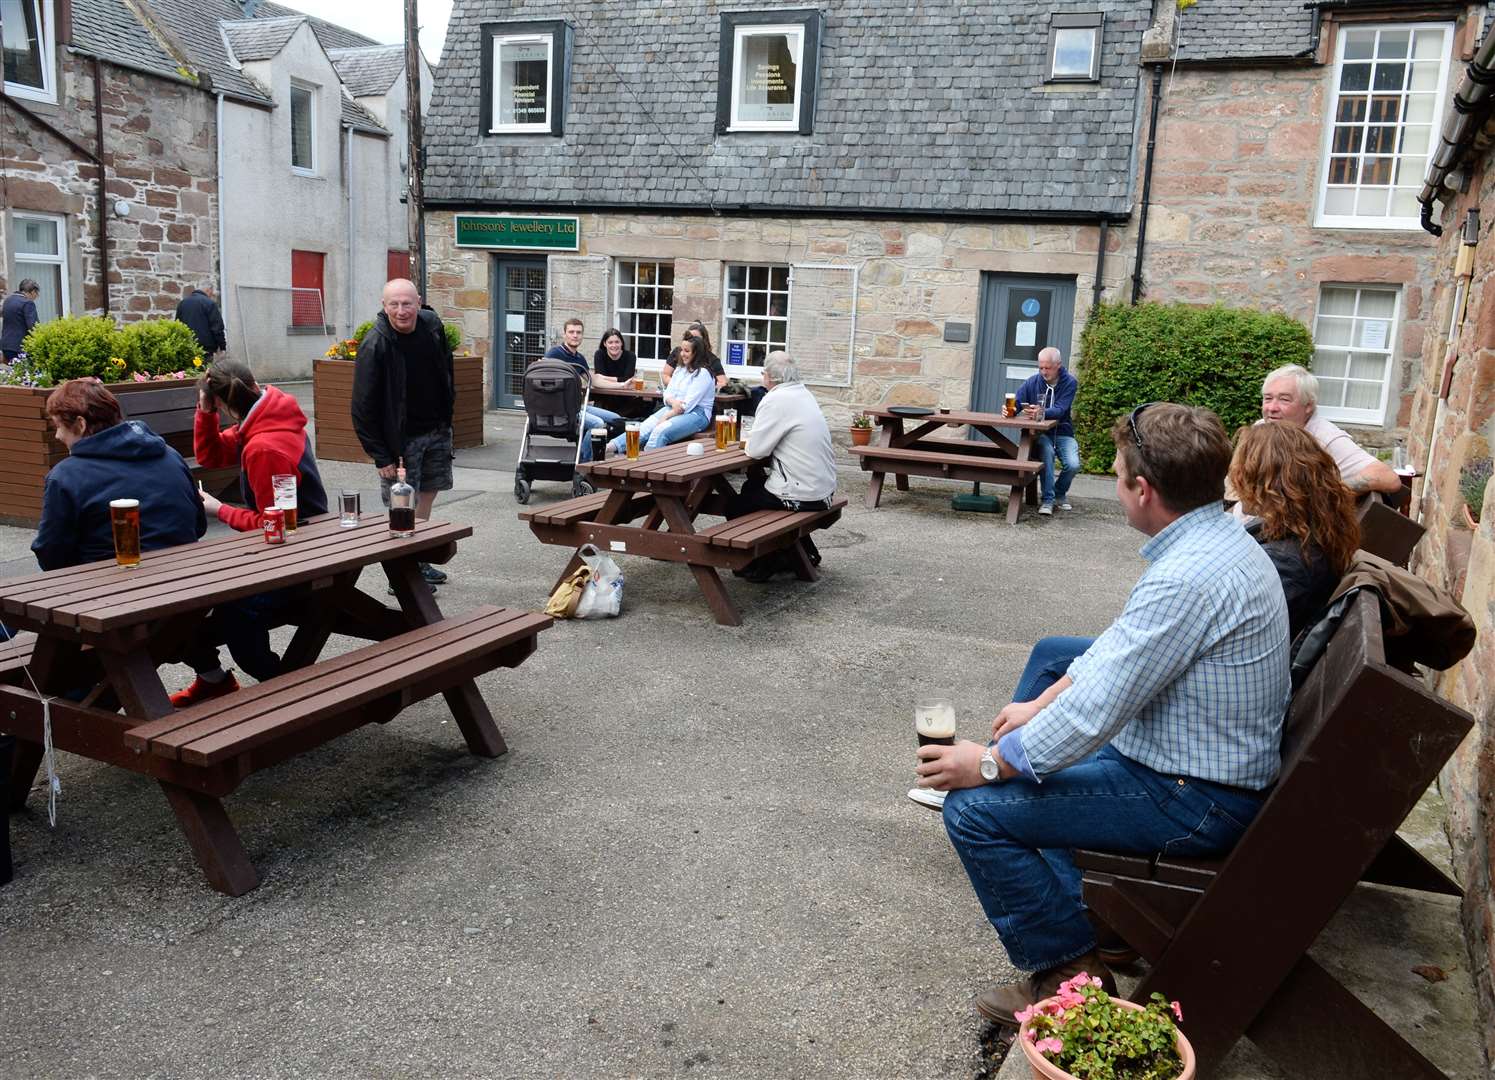 Beer garden welcomes a healthy crowd at the weekends. Picture: Gary Anthony.